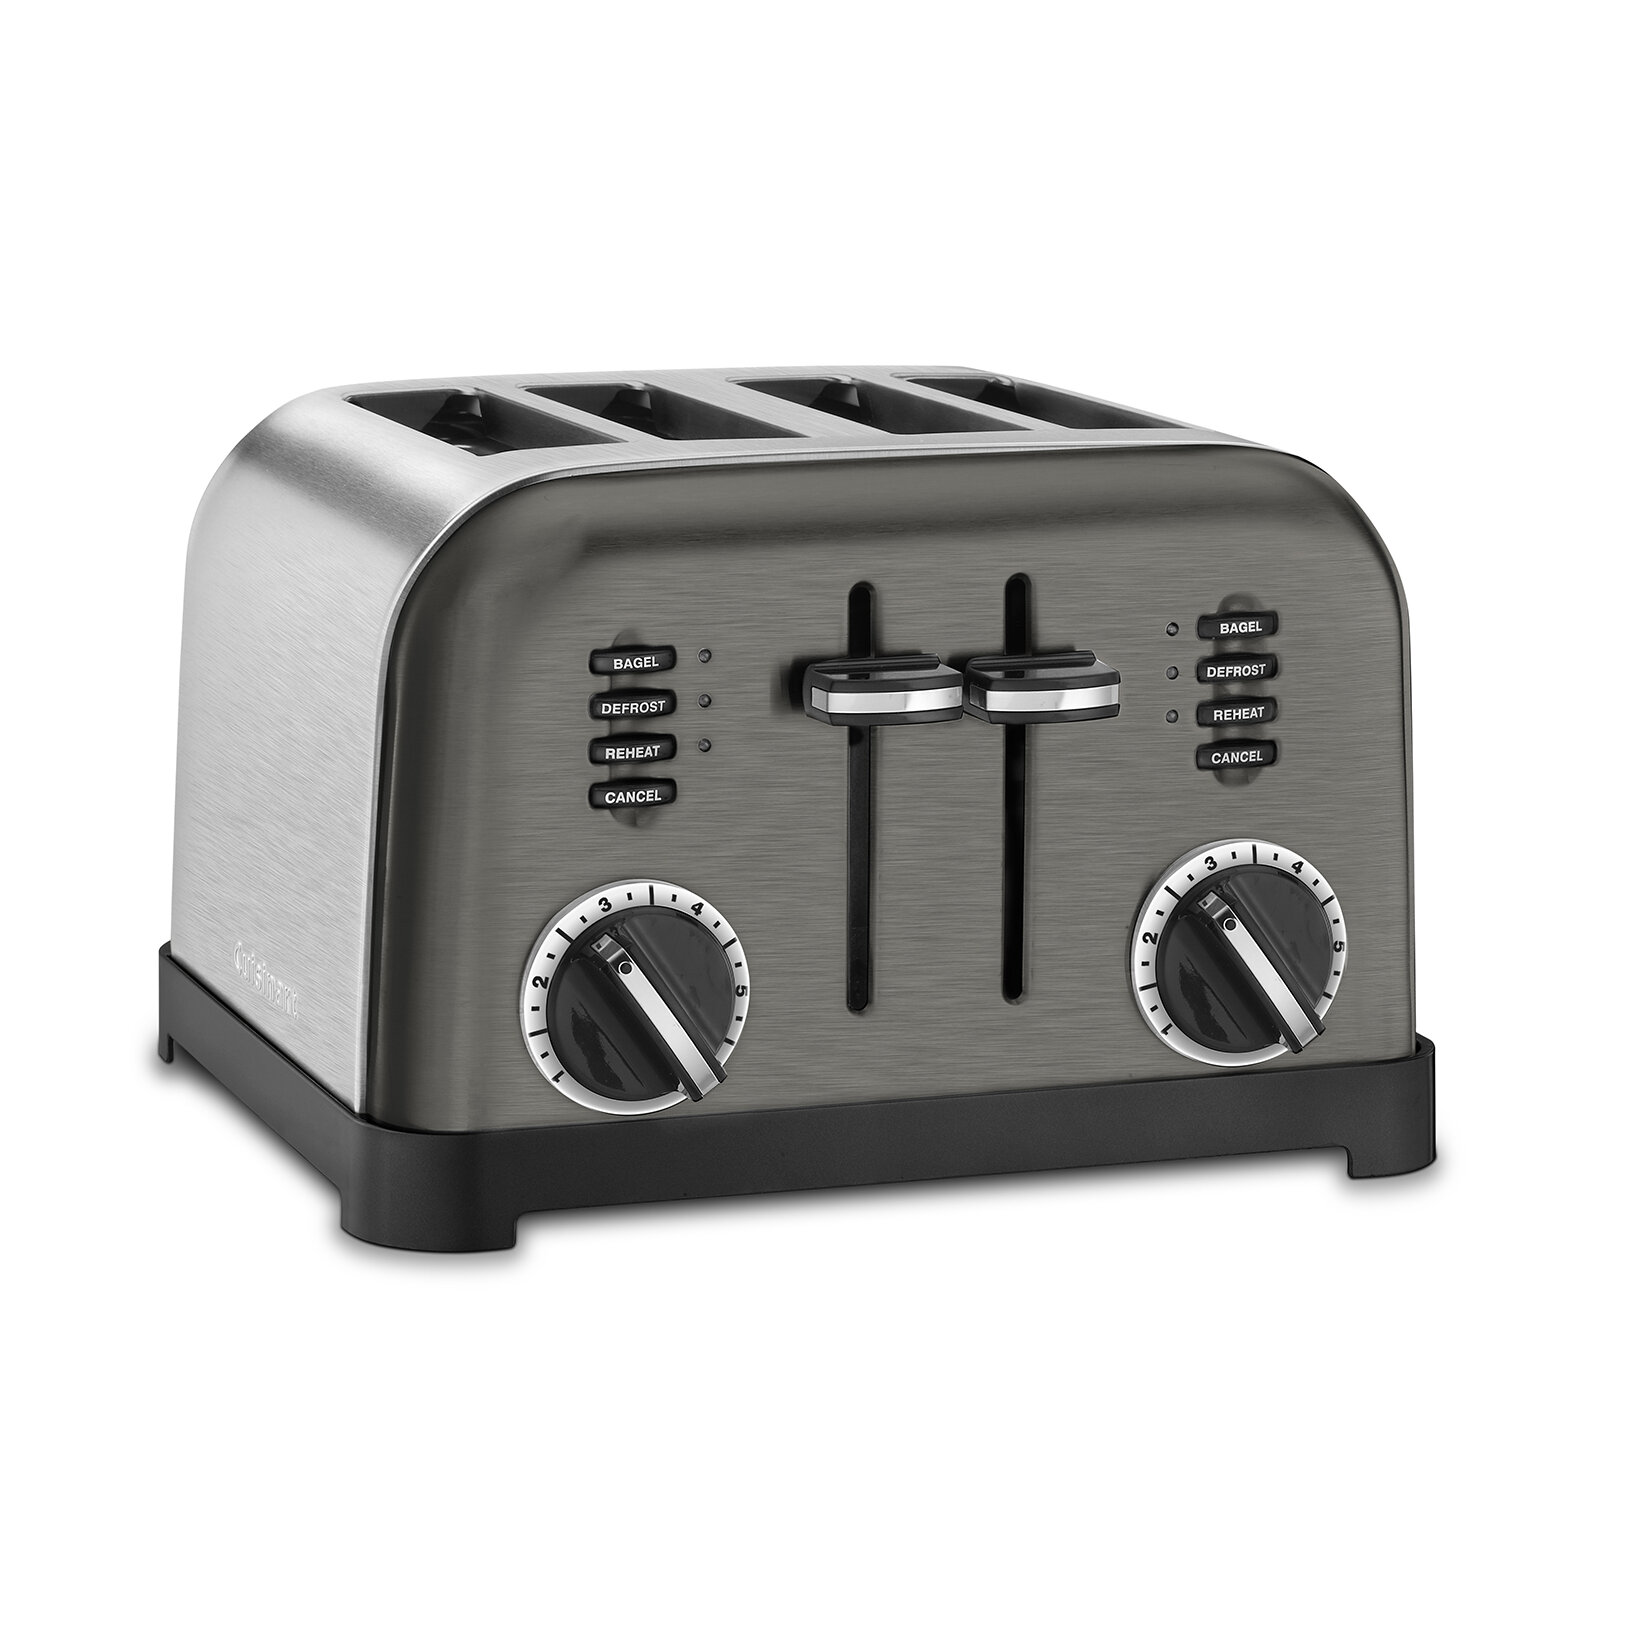 Cuisinart 4 Slice Compact Stainless Toaster